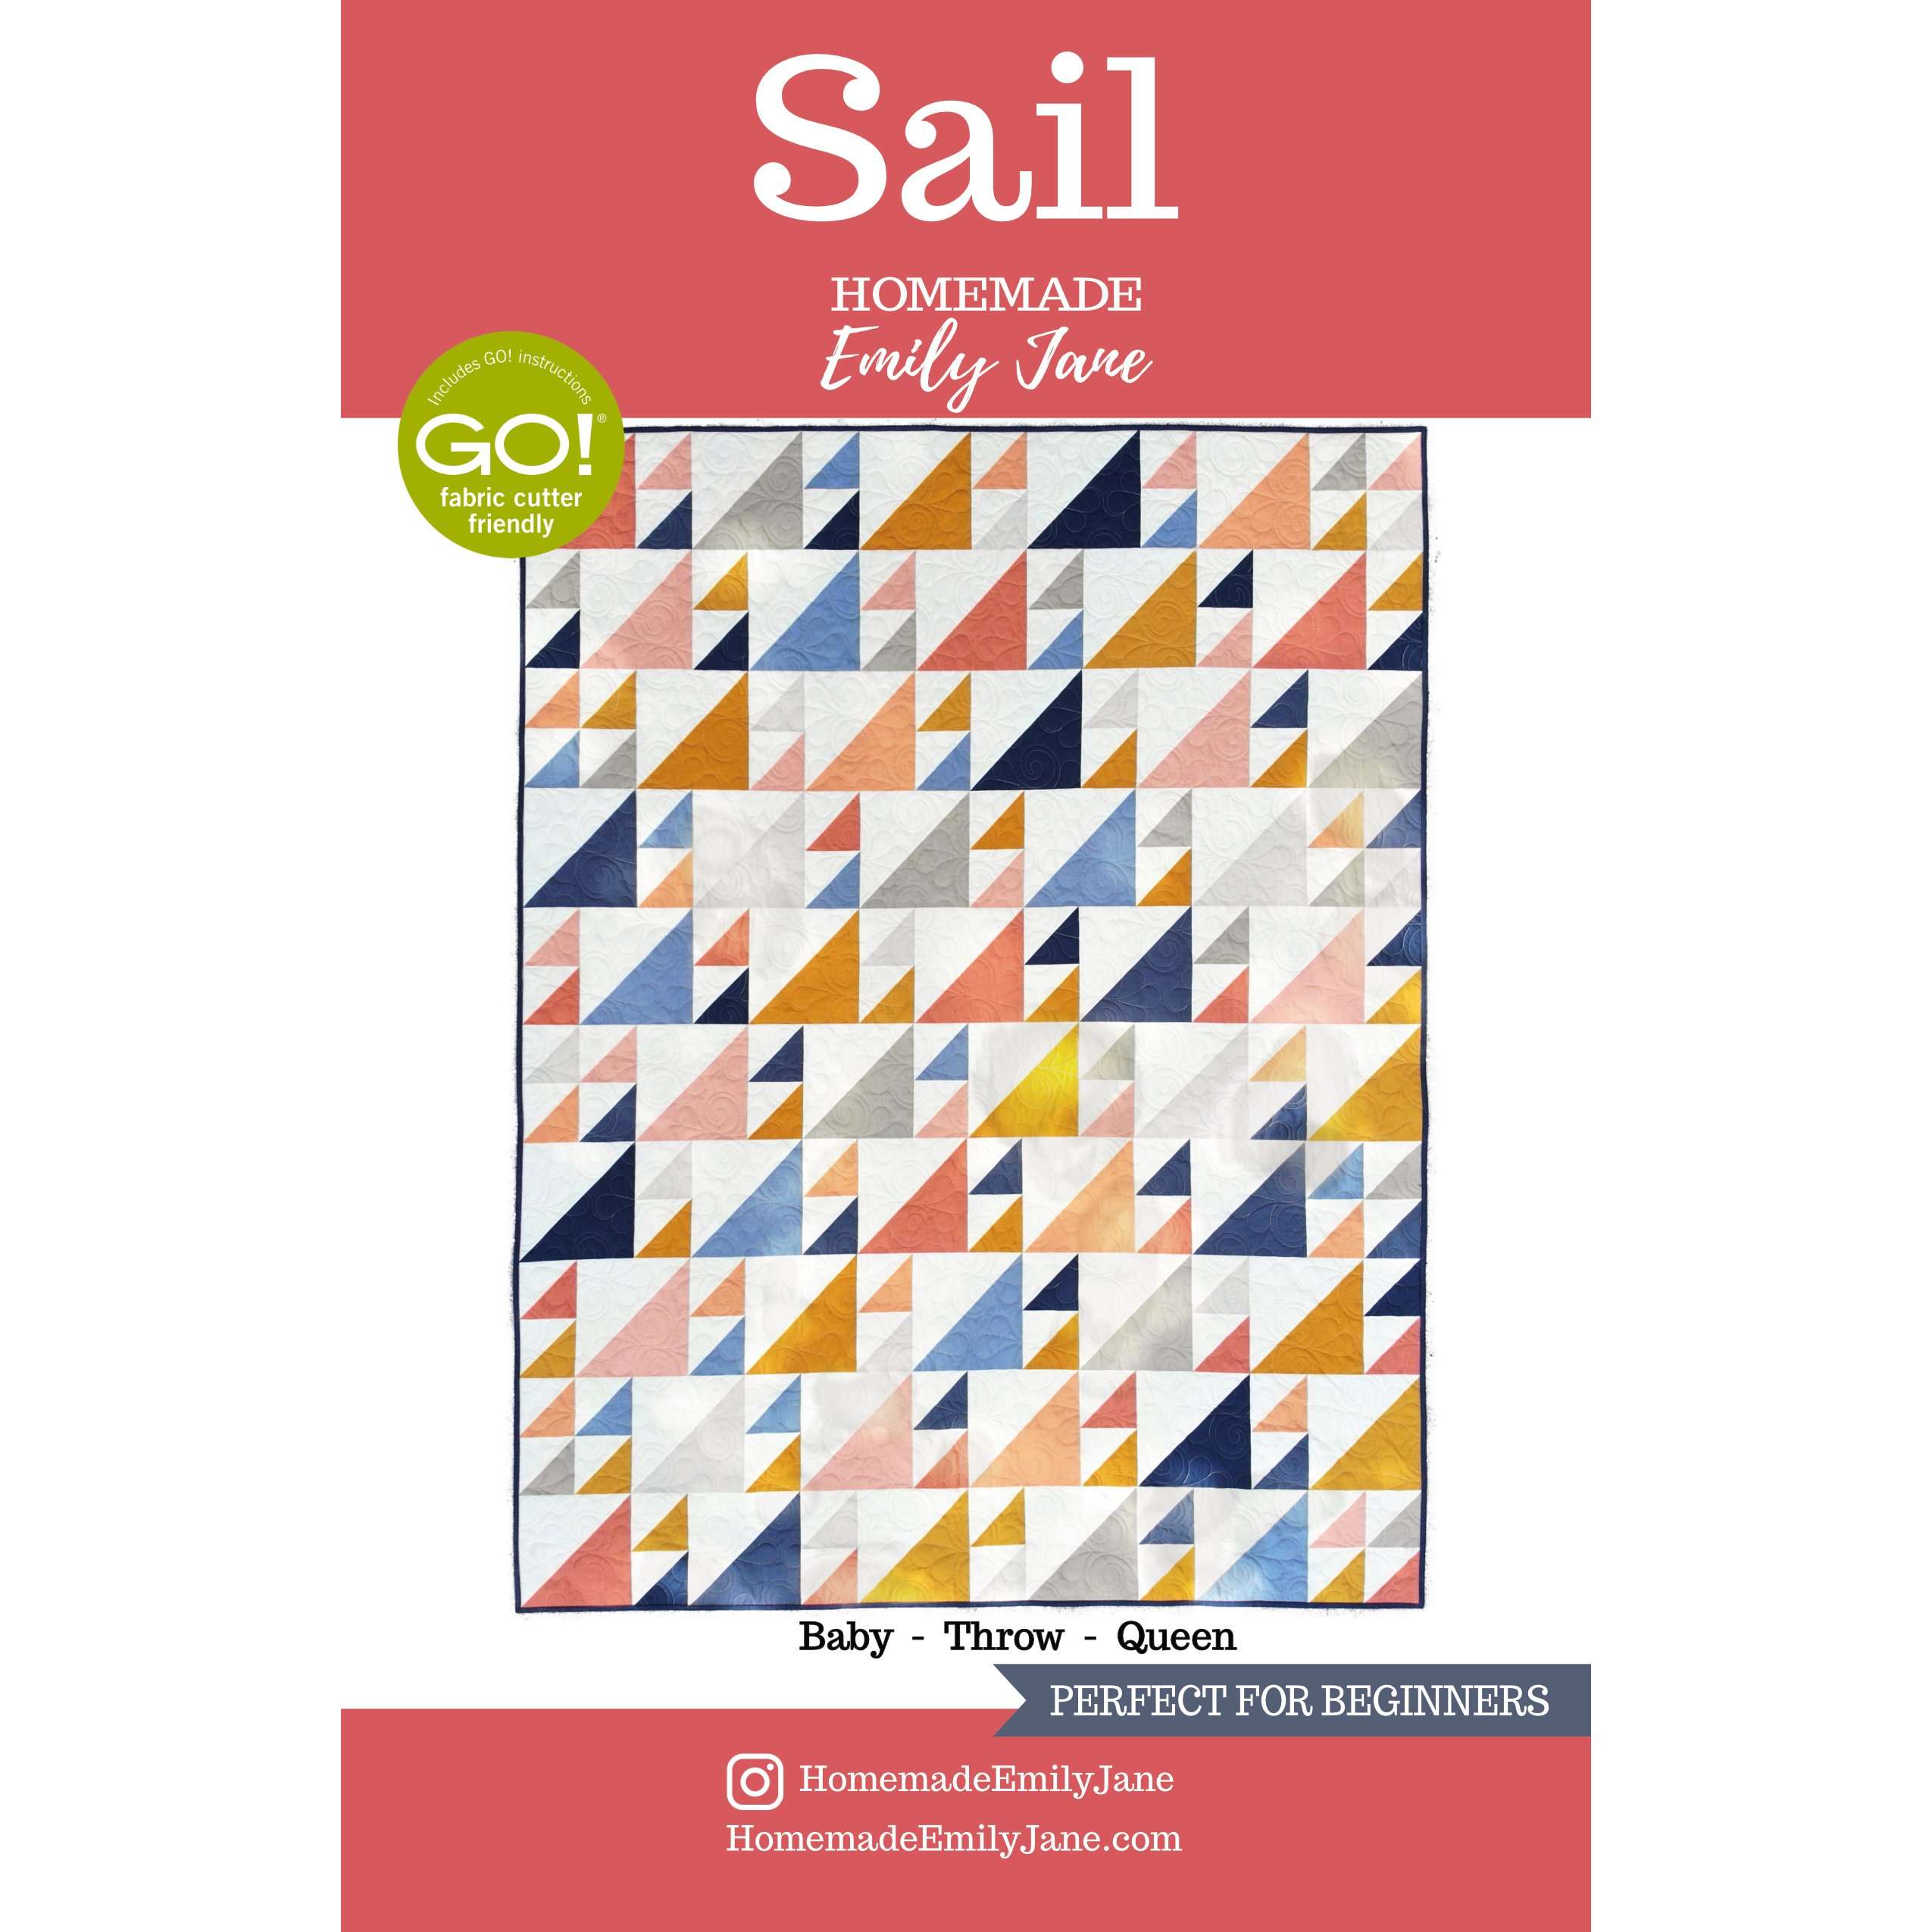 Sail by Homemade Emily Jane